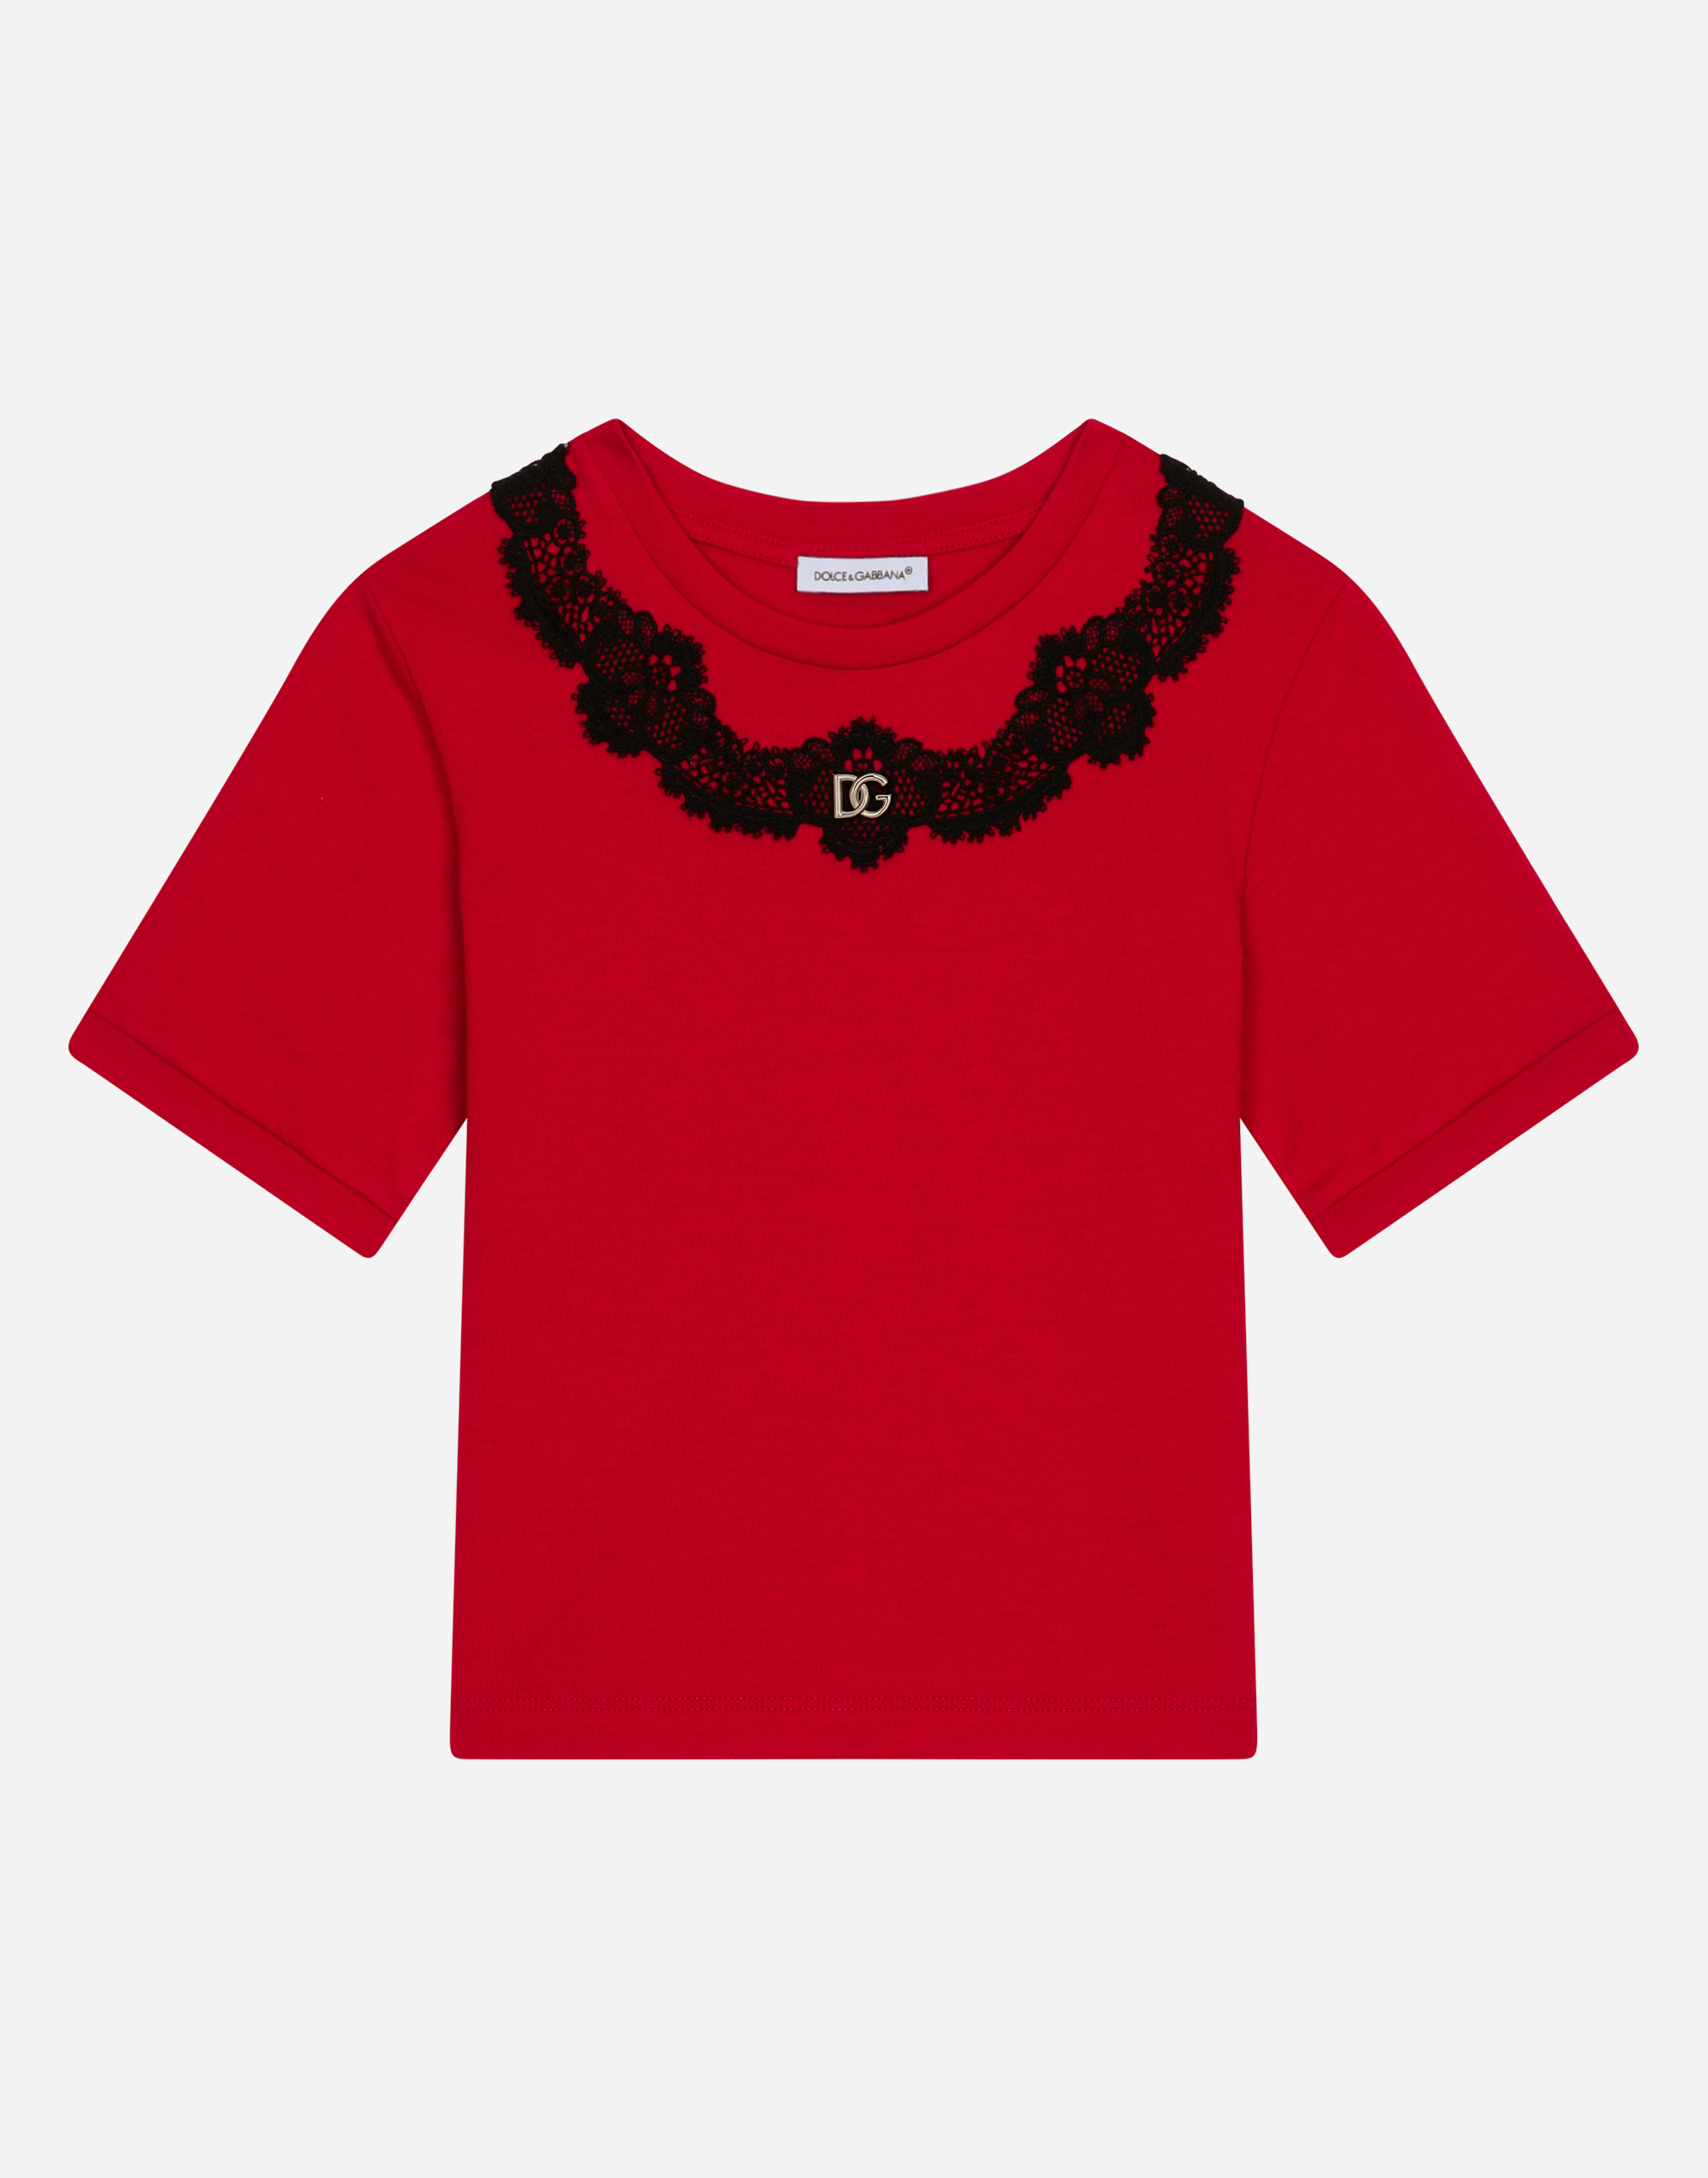 Dolce & Gabbana Kids' Jersey T-shirt With Lace Insert In Red